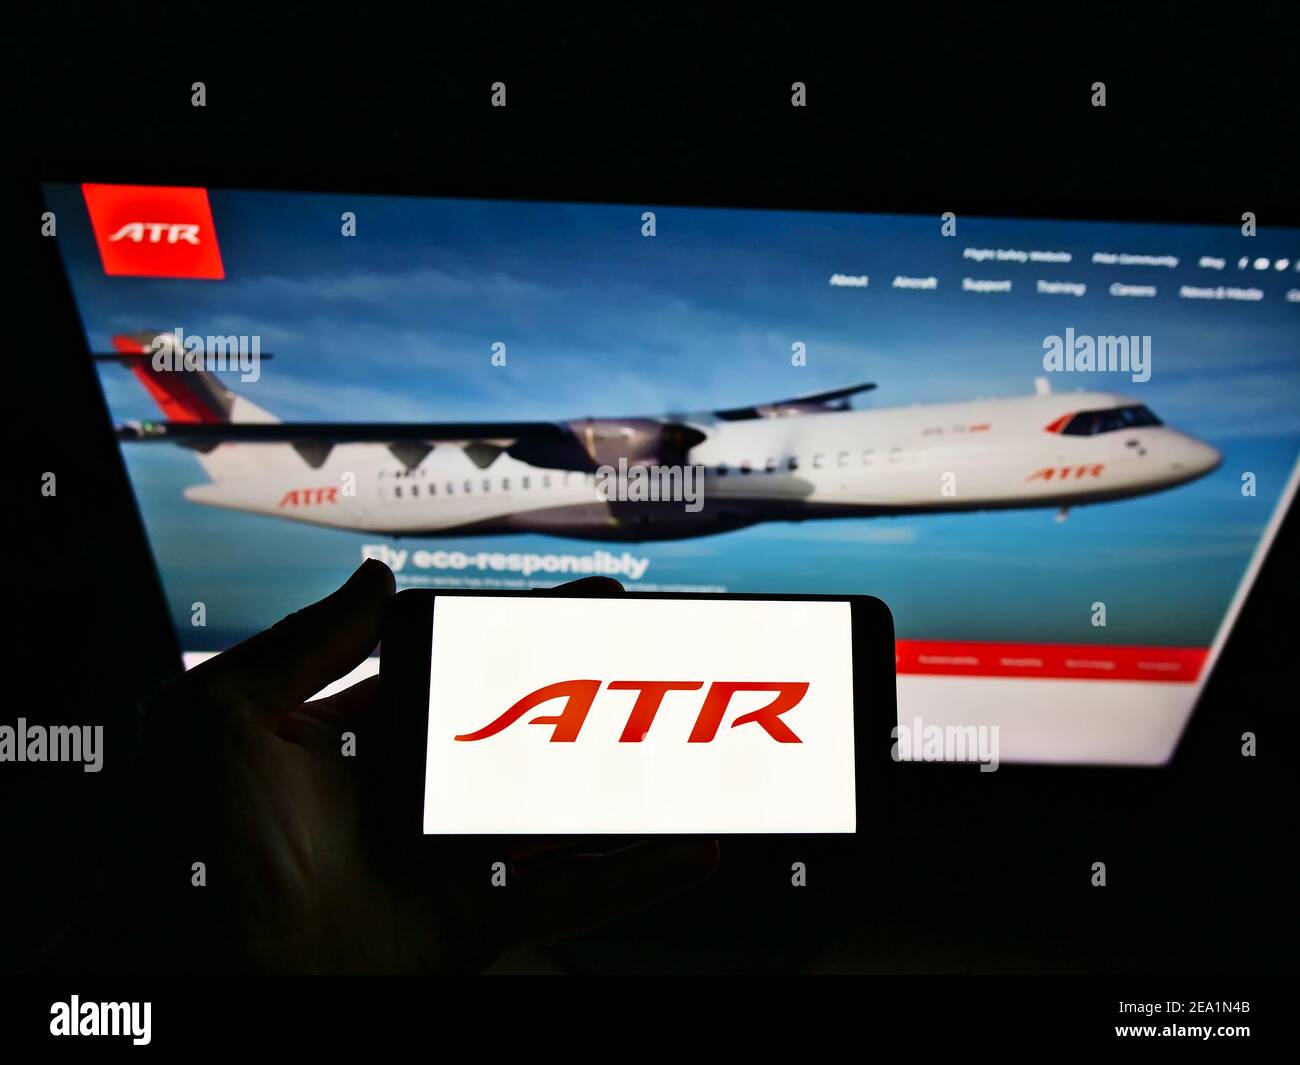 Person holding smartphone with logo of aircraft manufacturer Avions de Transport Régional (ATR) on screen in front of website. Focus on phone display. Stock Photo